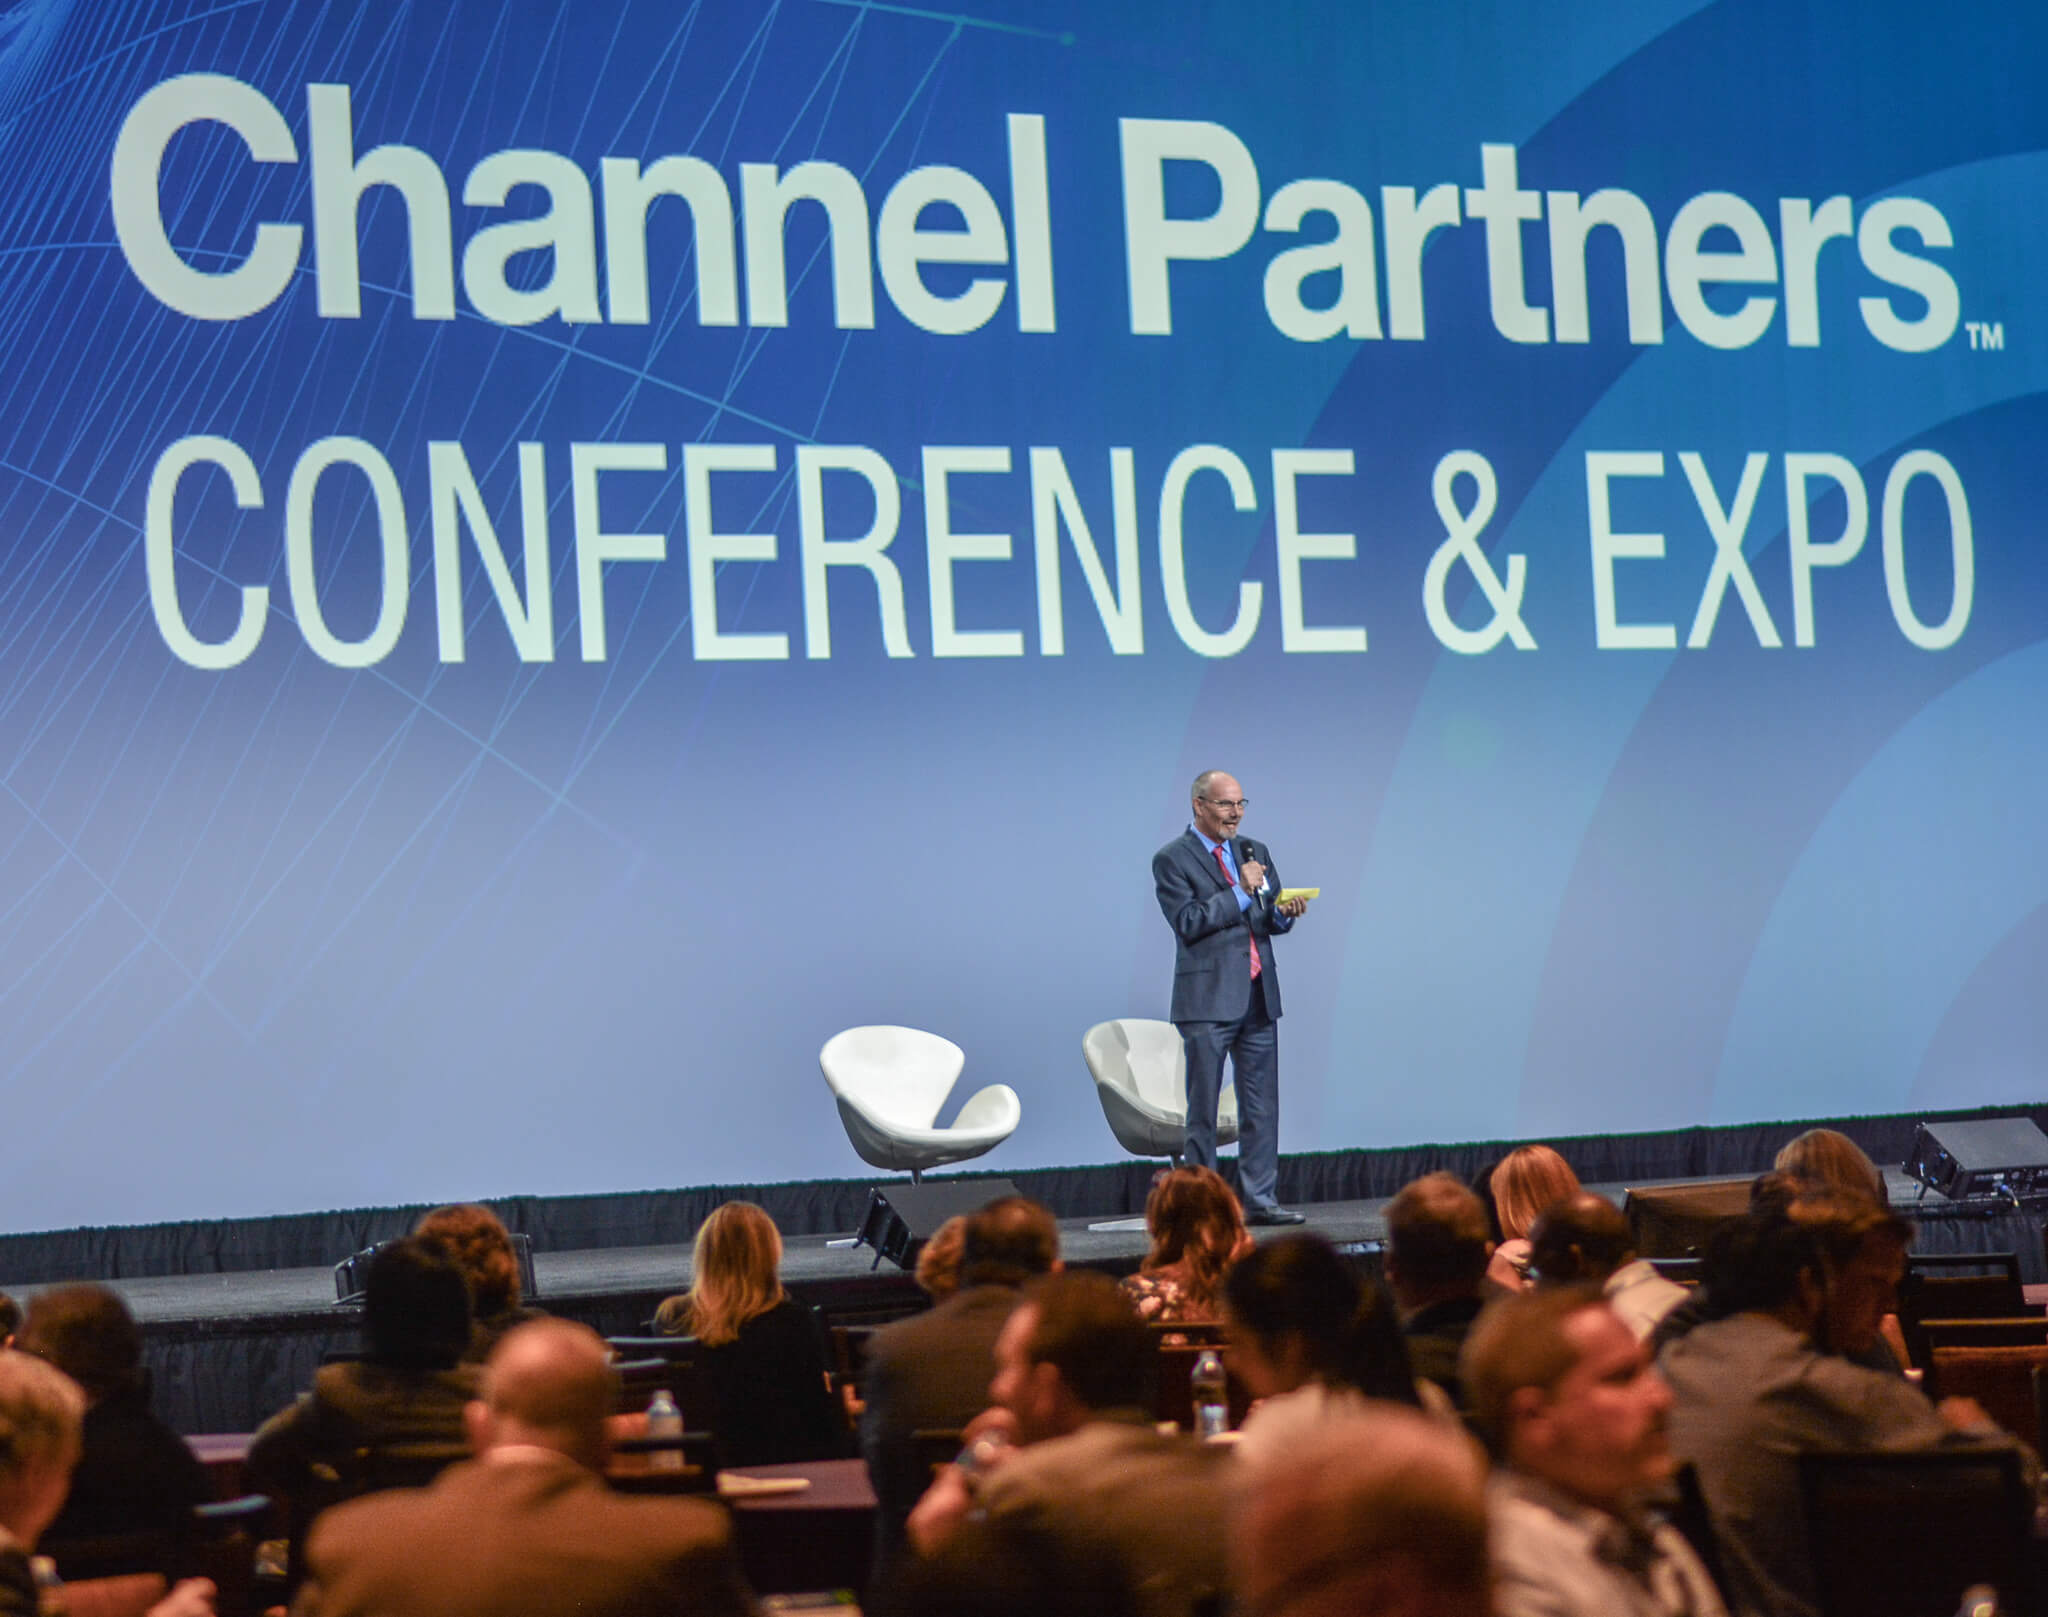 Channel partners conference expo stage